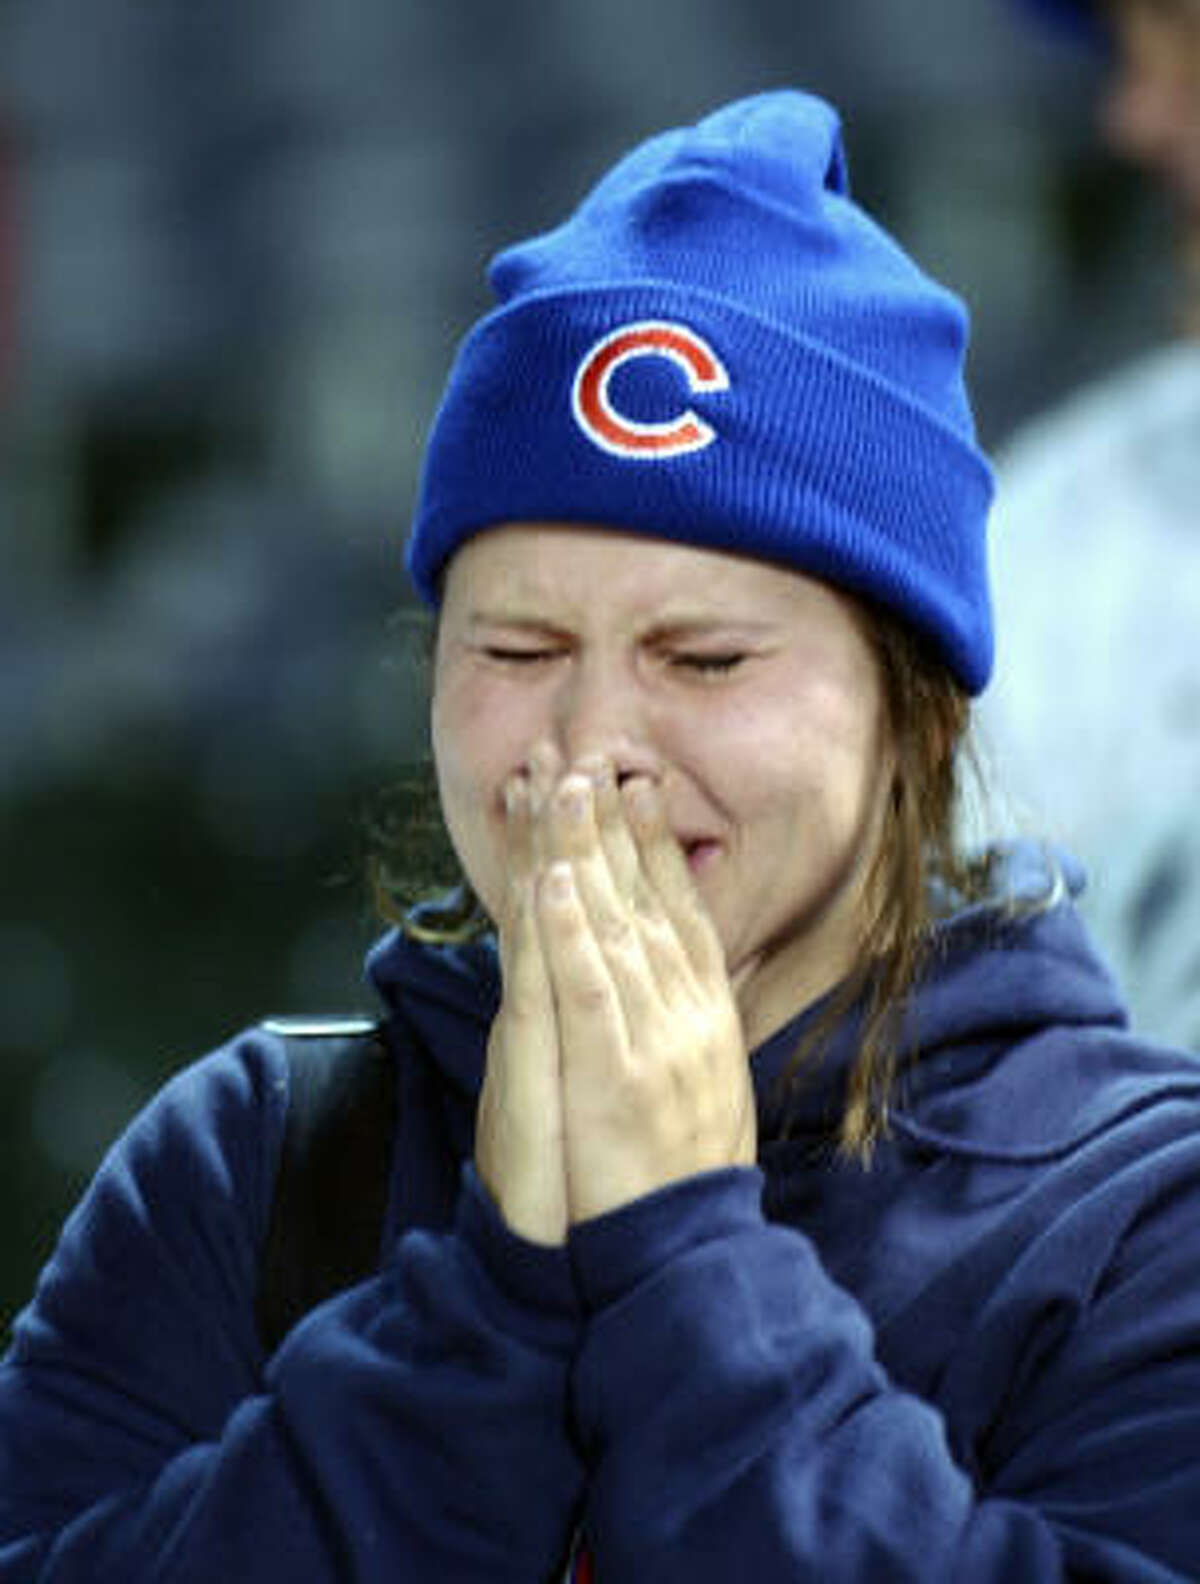 2003: Cubs-Red Sox With both teams enduring title droughts of epic proportions at the time, Chicago (without a crown since 1908) and Boston (ditto since 1918) lost their respective championship series in seven games as they discovered the Marlins and Yankees weren't the sympathetic types. The Bosox rebounded and won it all in 2004 and 2007. The Cubs, who blew a 3-1 series lead against Florida, haven't won a postseason game since.